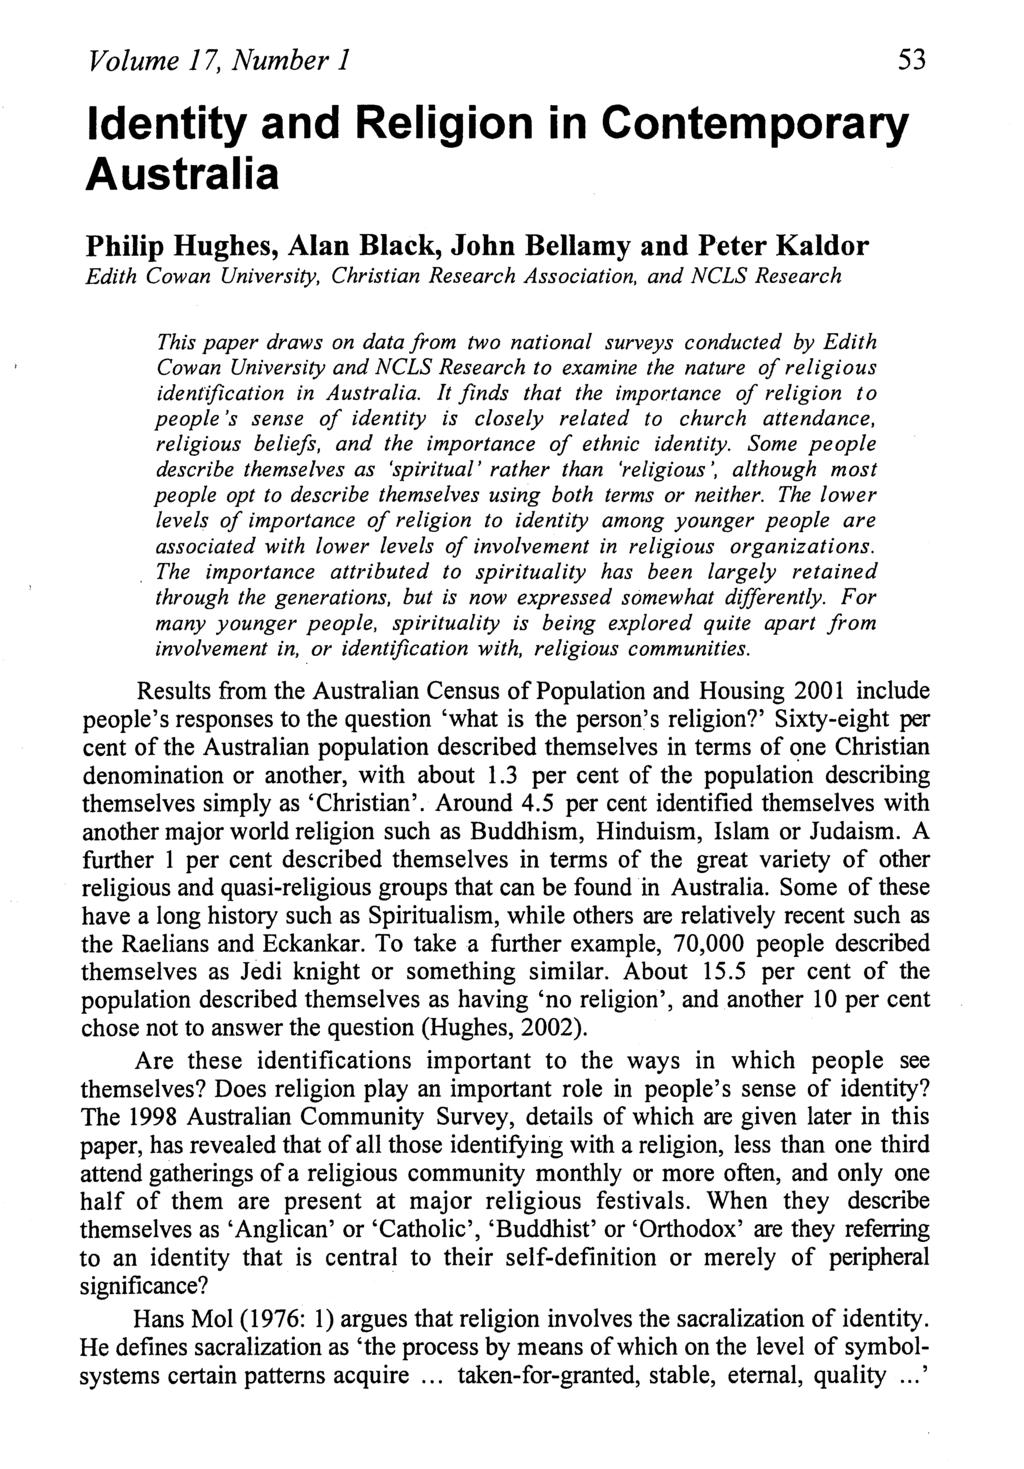 Volume 17, Number 1 53 Identity and Religion in Contemporary Australia Philip Hughes, Alan Black, John Bellamy and Peter Kaldor Edith Cowan University, Christian Research Association, and NCLS